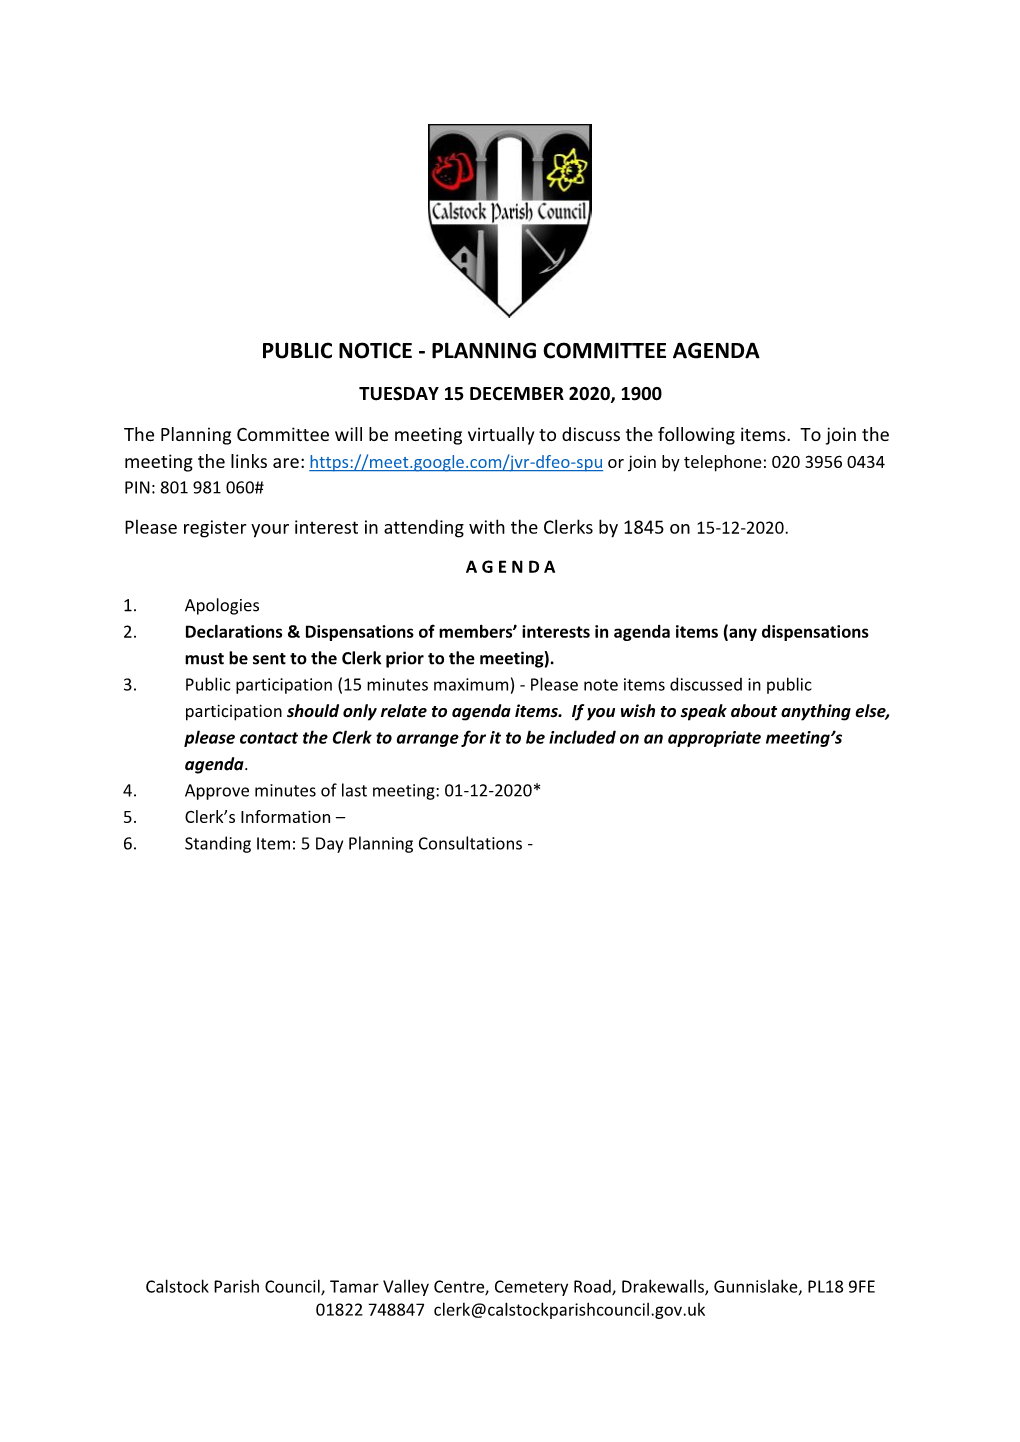 PUBLIC NOTICE - PLANNING COMMITTEE AGENDA TUESDAY 15 DECEMBER 2020, 1900 the Planning Committee Will Be Meeting Virtually to Discuss the Following Items